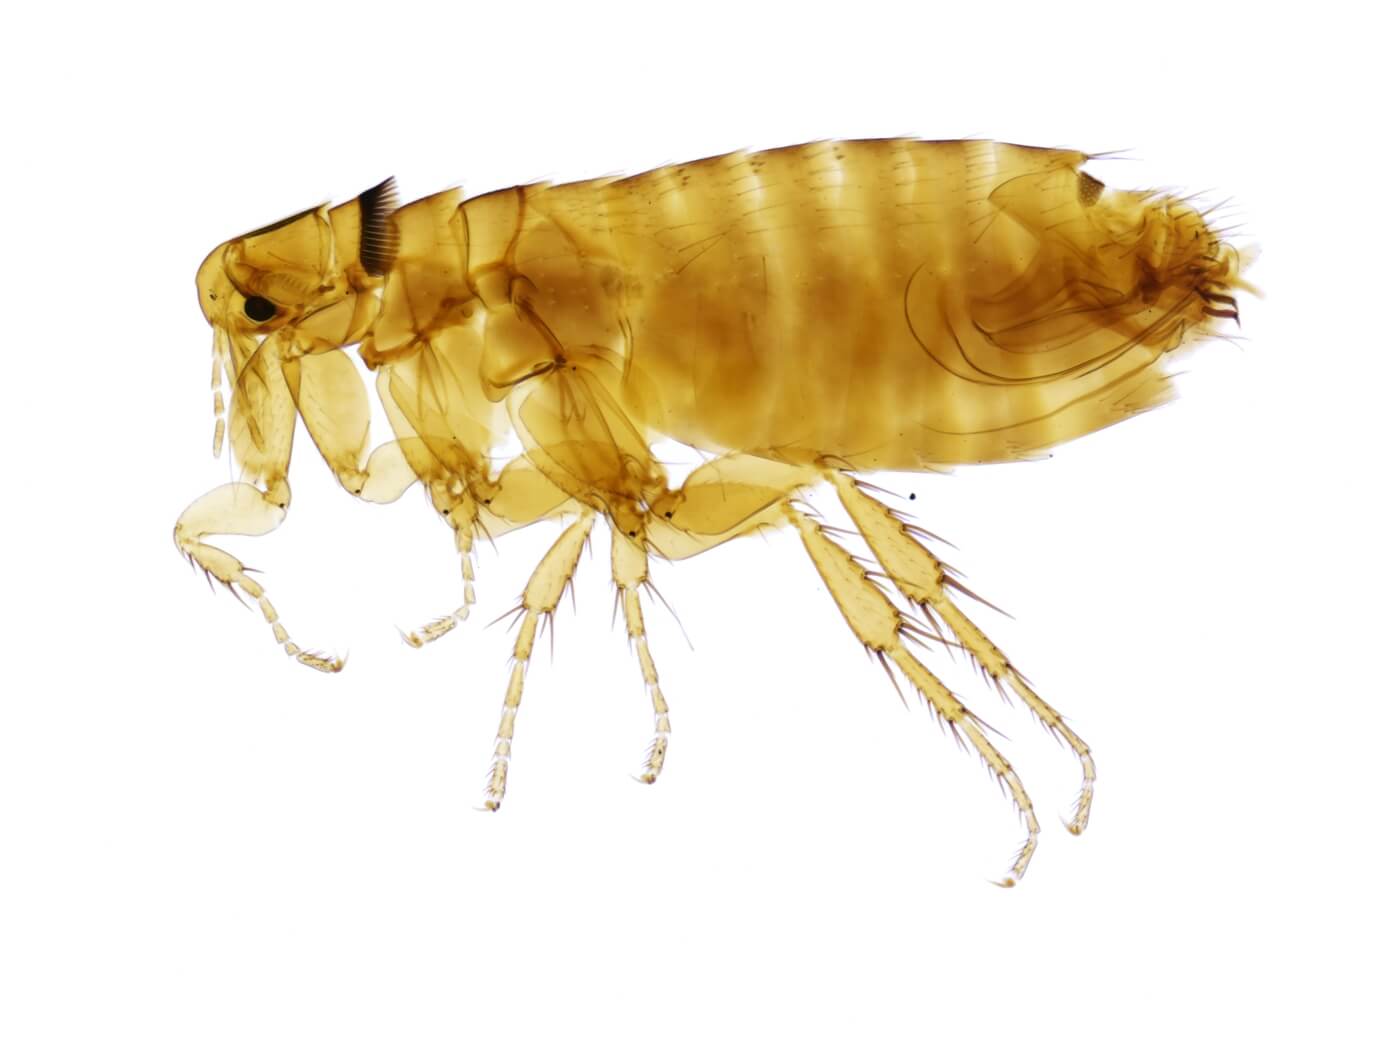 The type of flea that we exterminate